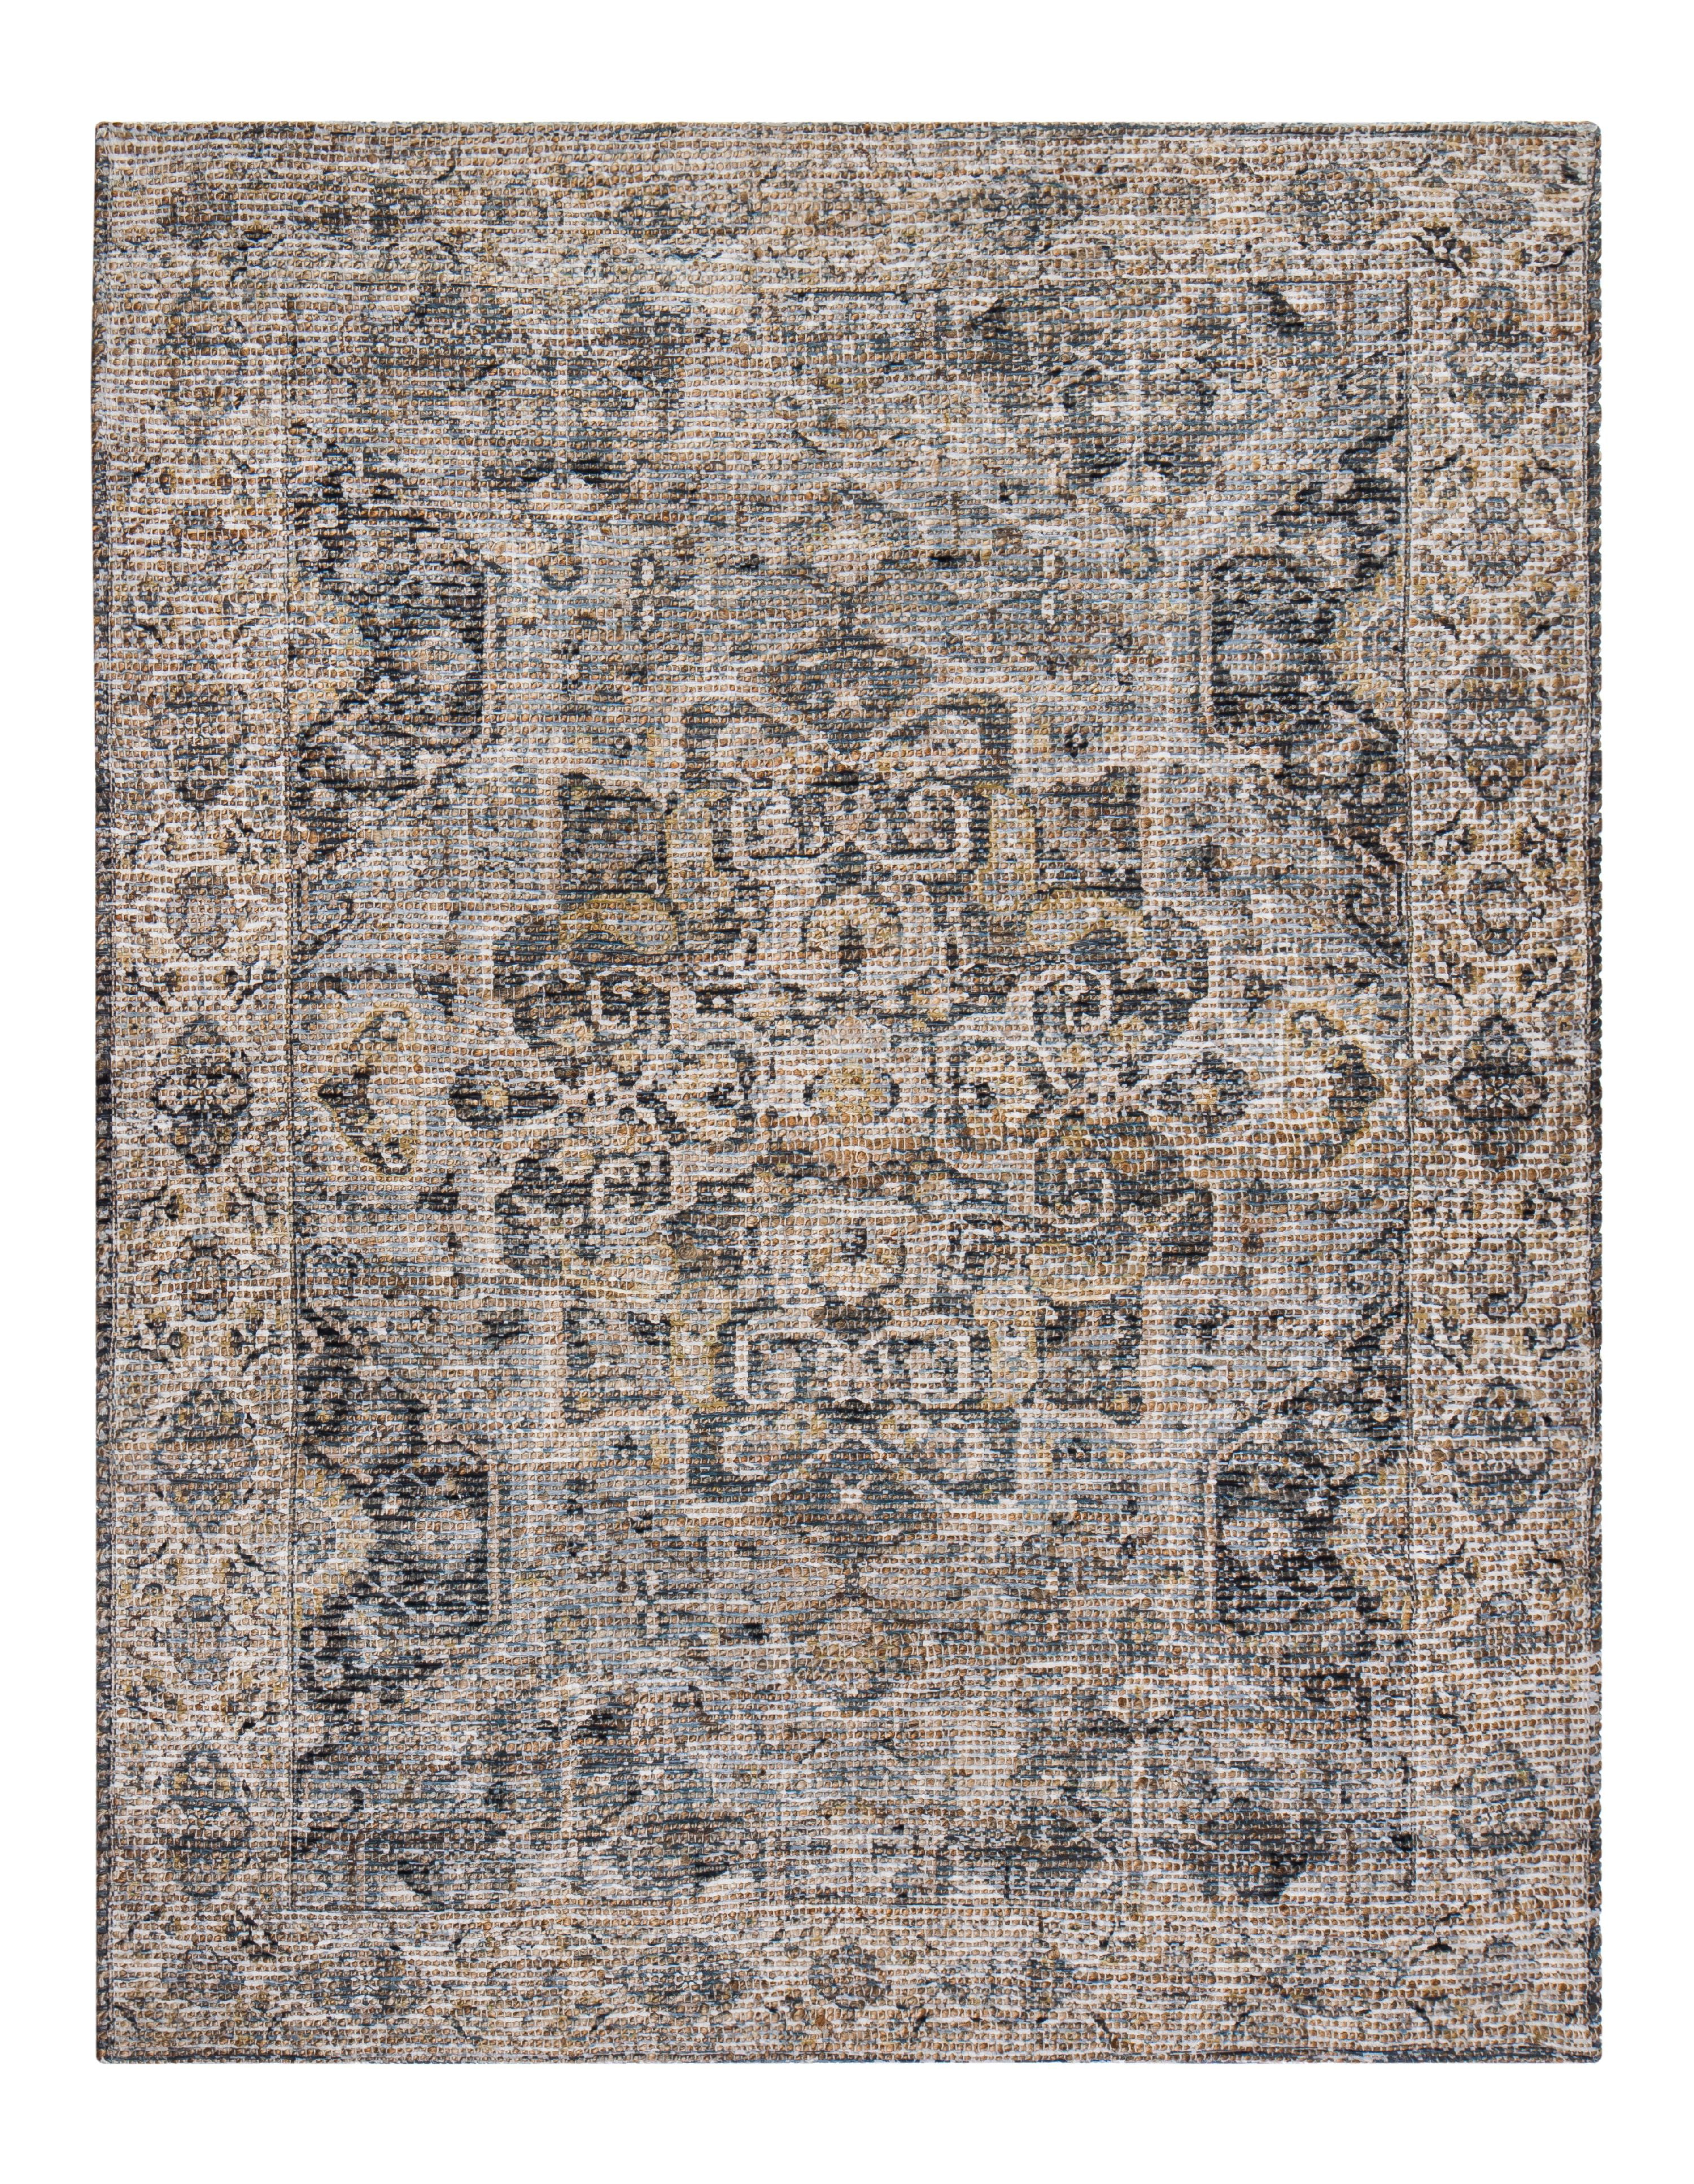 30% Polyester and 10% Cotton Rug Zagros Anji Mountain Distressed 60% Jute 8-Feet Round 